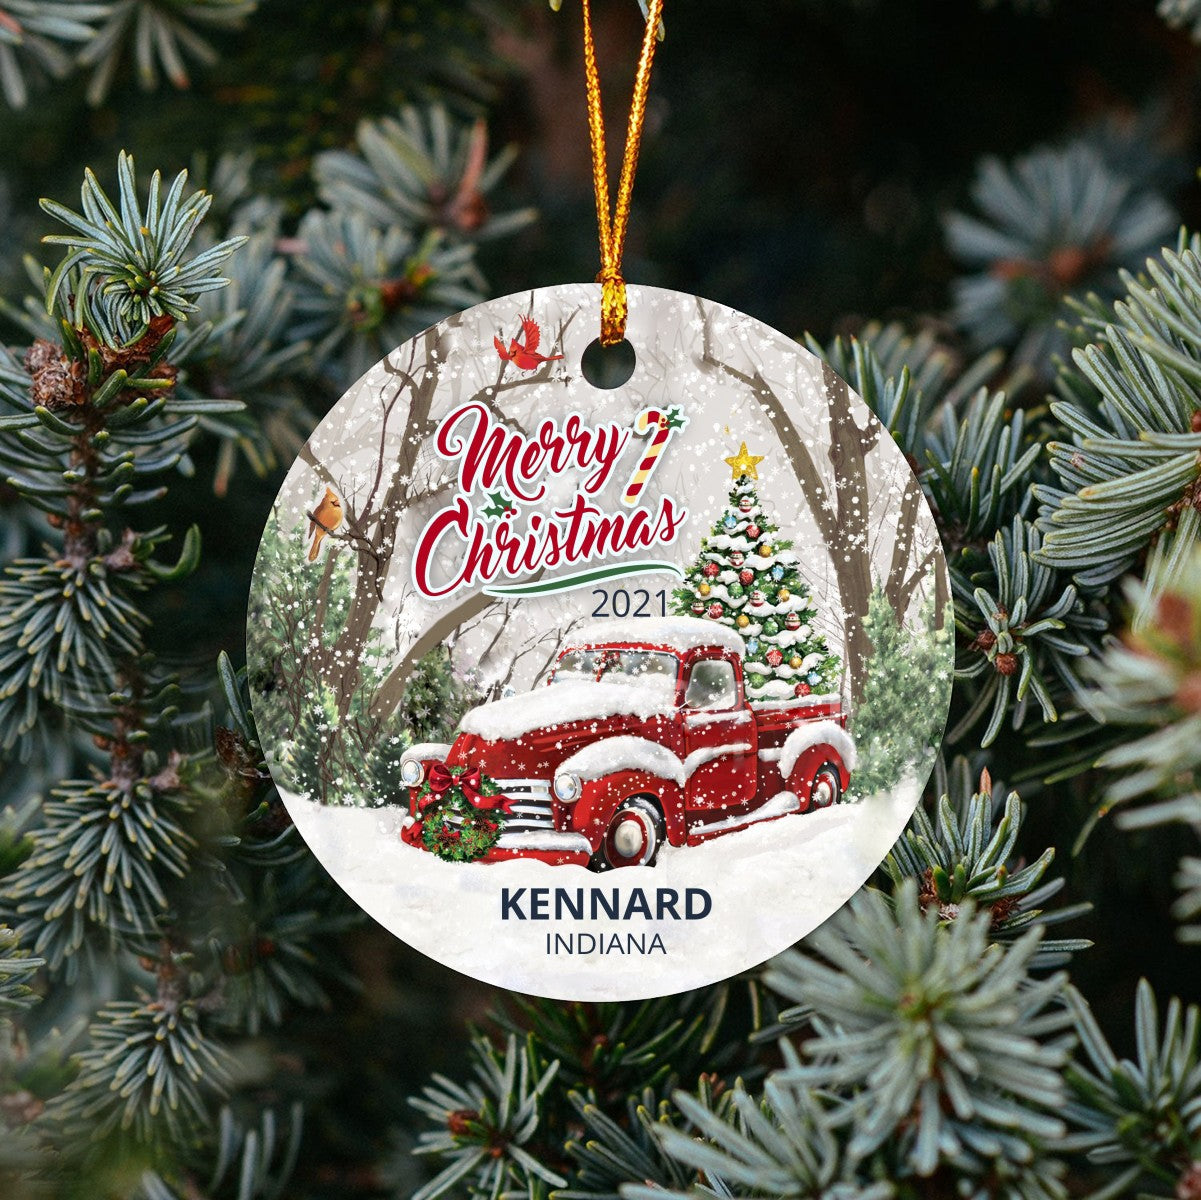 Christmas Tree Ornaments Kennard - Ornament With Name City, State Kennard Indiana IN Ornament - Red Truck Xmas Ornaments 3'' Plastic Gift For Family, Friend And Housewarming